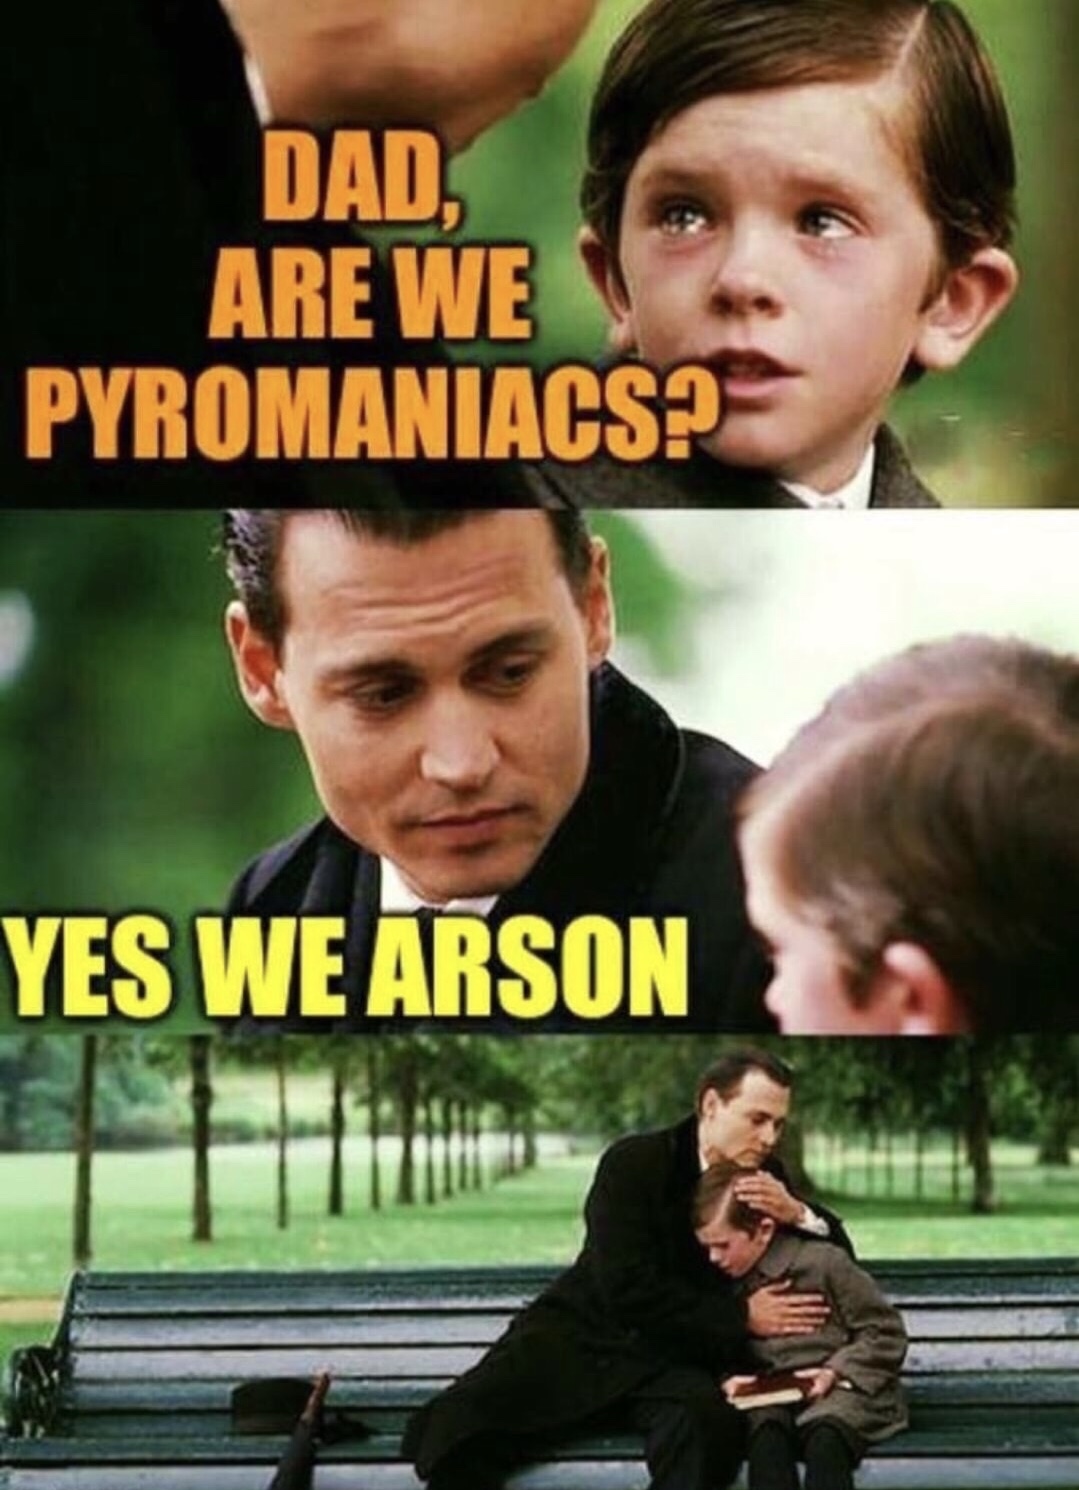 funny dark memes - Dad, Are We Pyromaniacs? Yes We Arson